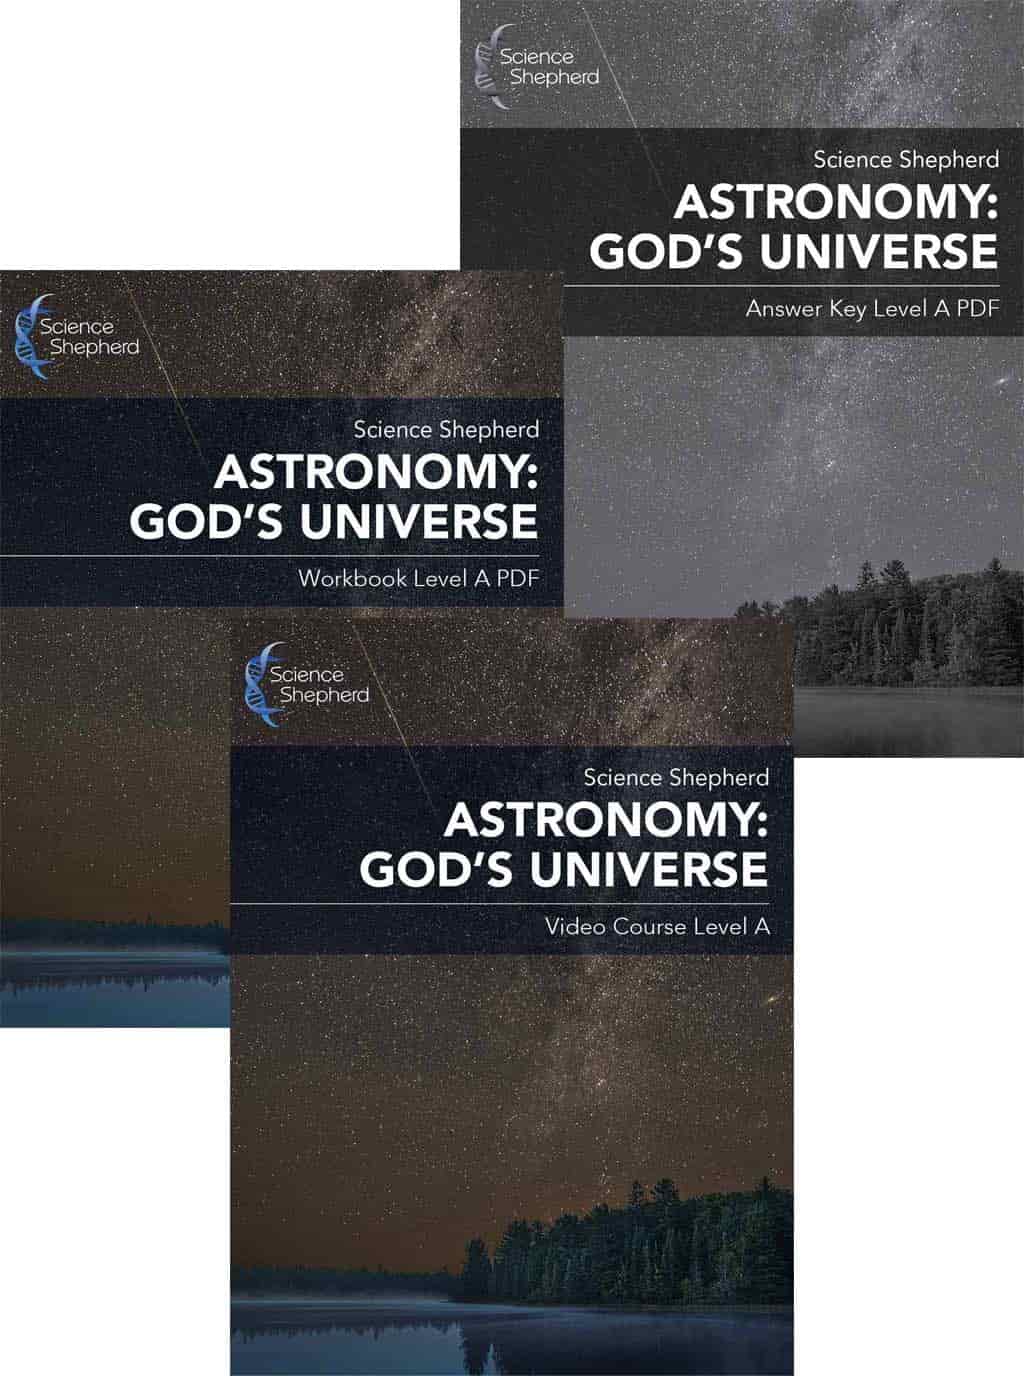 Christian astronomy curriculum Level A PDF bundle cover of night sky over a lake